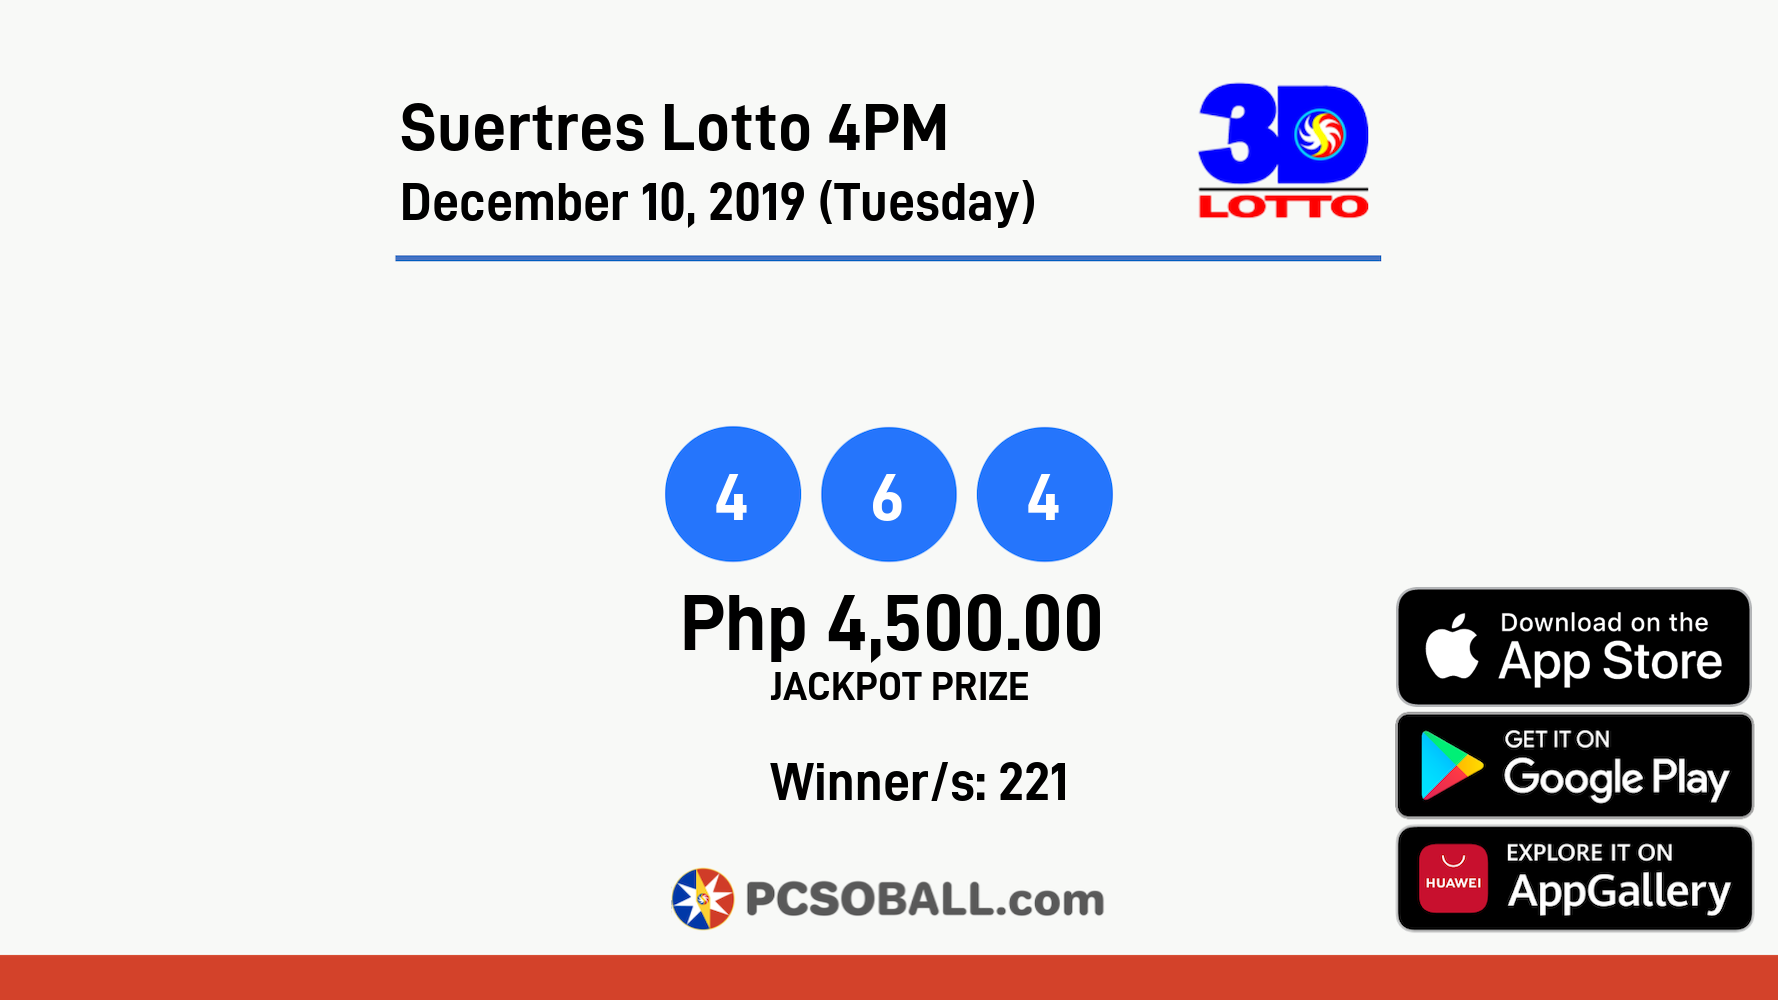 Suertres Lotto 4PM December 10, 2019 (Tuesday) Result